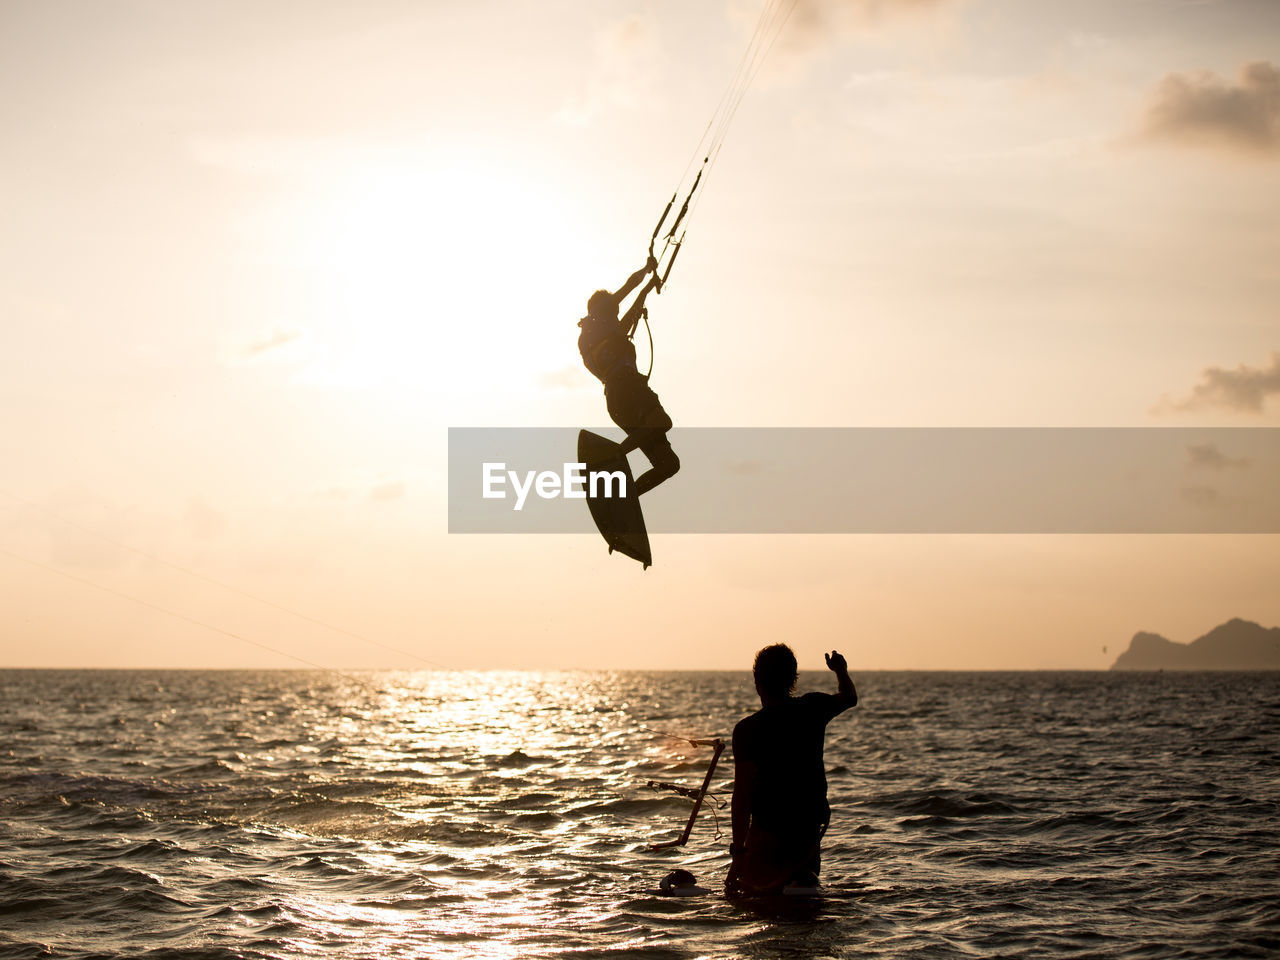 View of silhouette kite surfing in the ocean